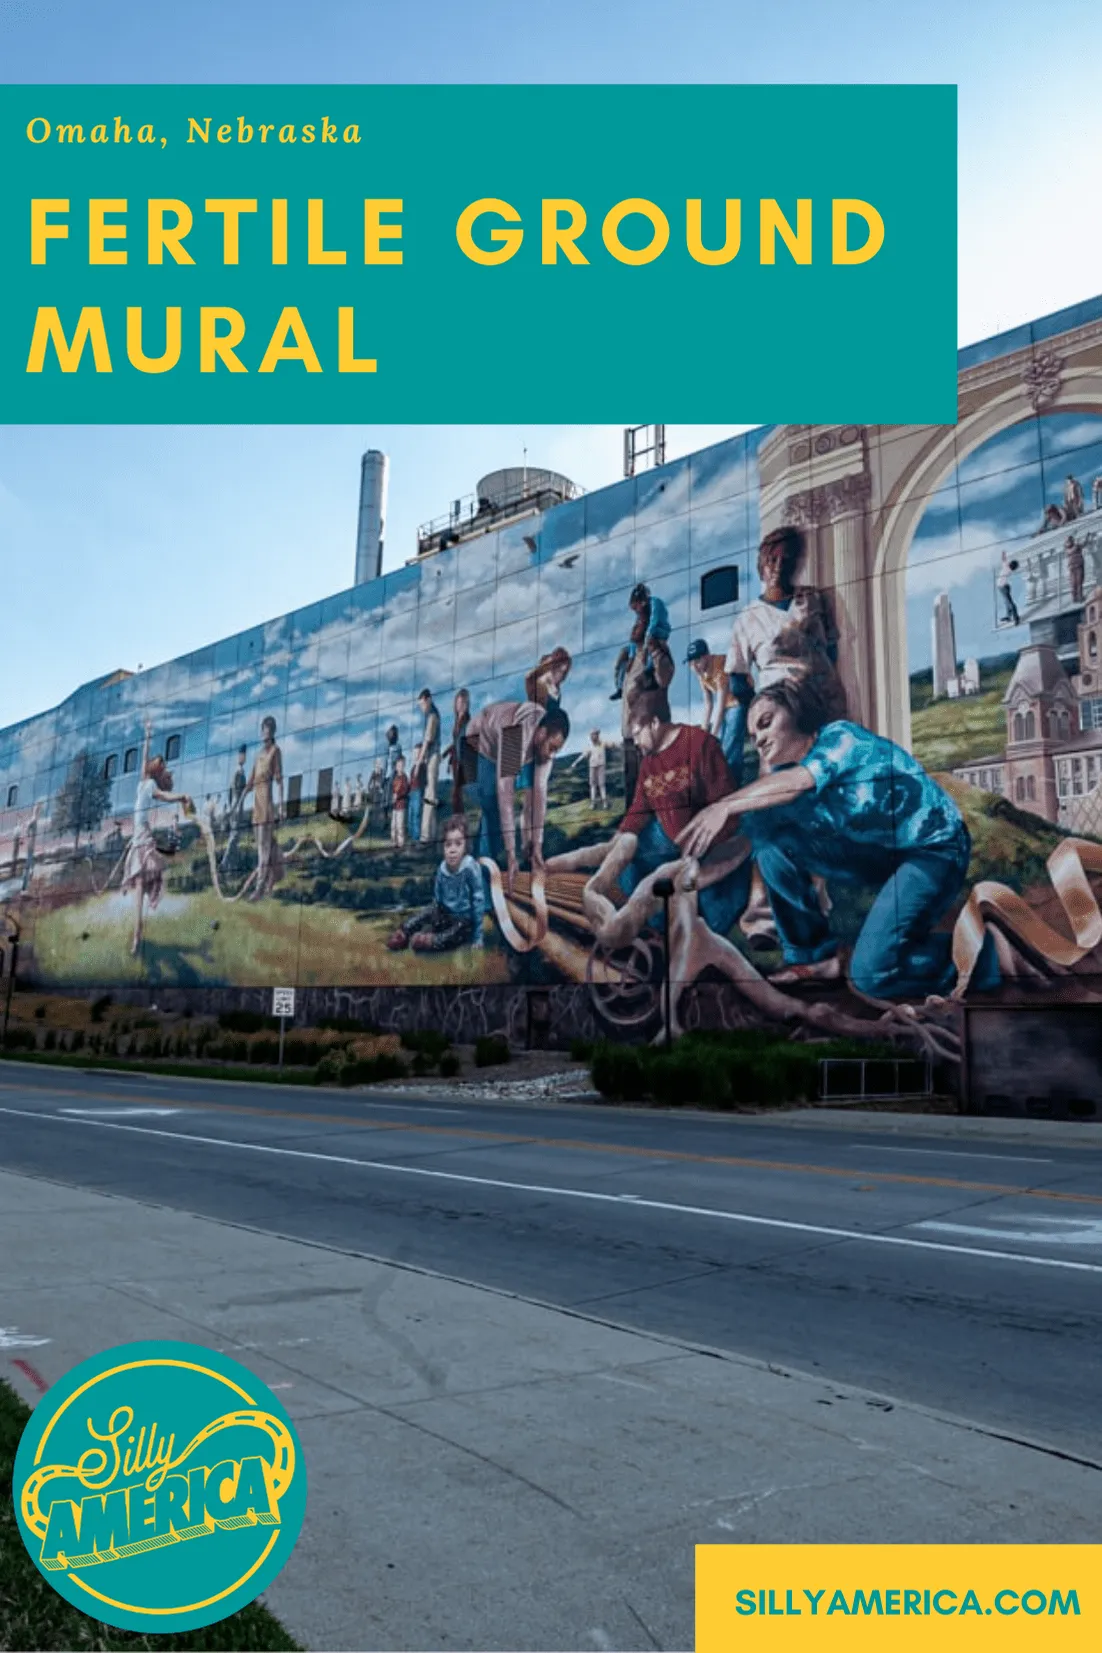 The Fertile Ground mural in Omaha, Nebraska was created by artist Meg Saligman. The 32,500 square-foot mural is one of the largest murals in the country. #NebraskaRoadsideAttractions #NebraskaRoadsideAttraction #RoadsideAttractions #RoadsideAttraction #RoadTrip #NebraskaRoadTrip #ThingsToDoInNebraska #NebraskaTravelRoadTrips #ThingsToSeeInNebraska #StreetArt #mural